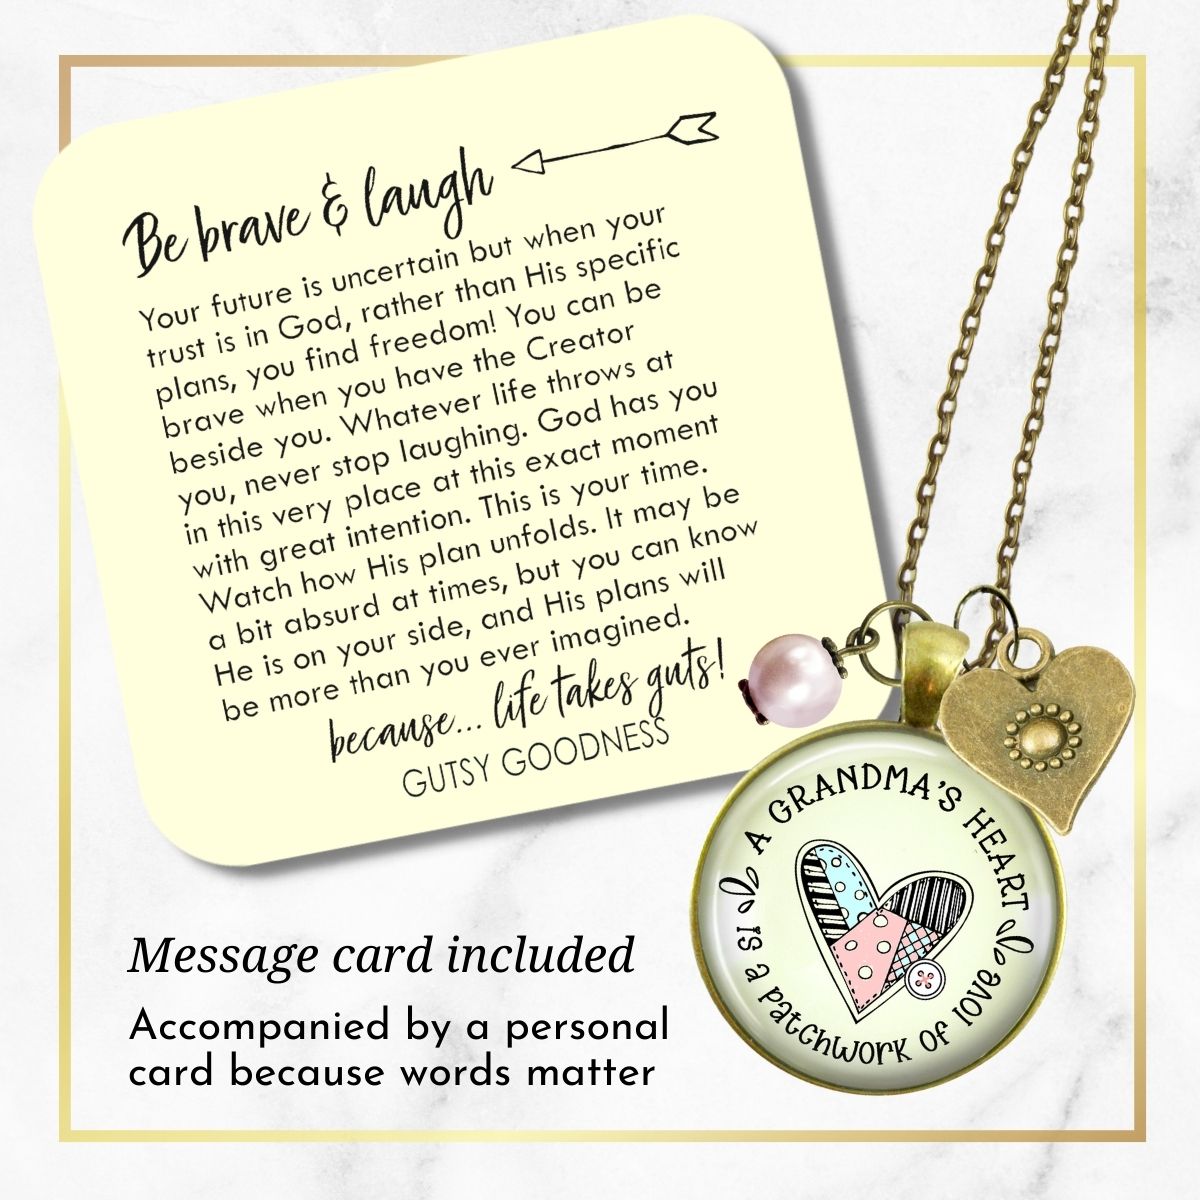 Handmade Gutsy Goodness Jewelry Grandmother Necklace Gift Grandma's Heart Is A Patchwork of Love Handmade Jewelry, Meaningful Card